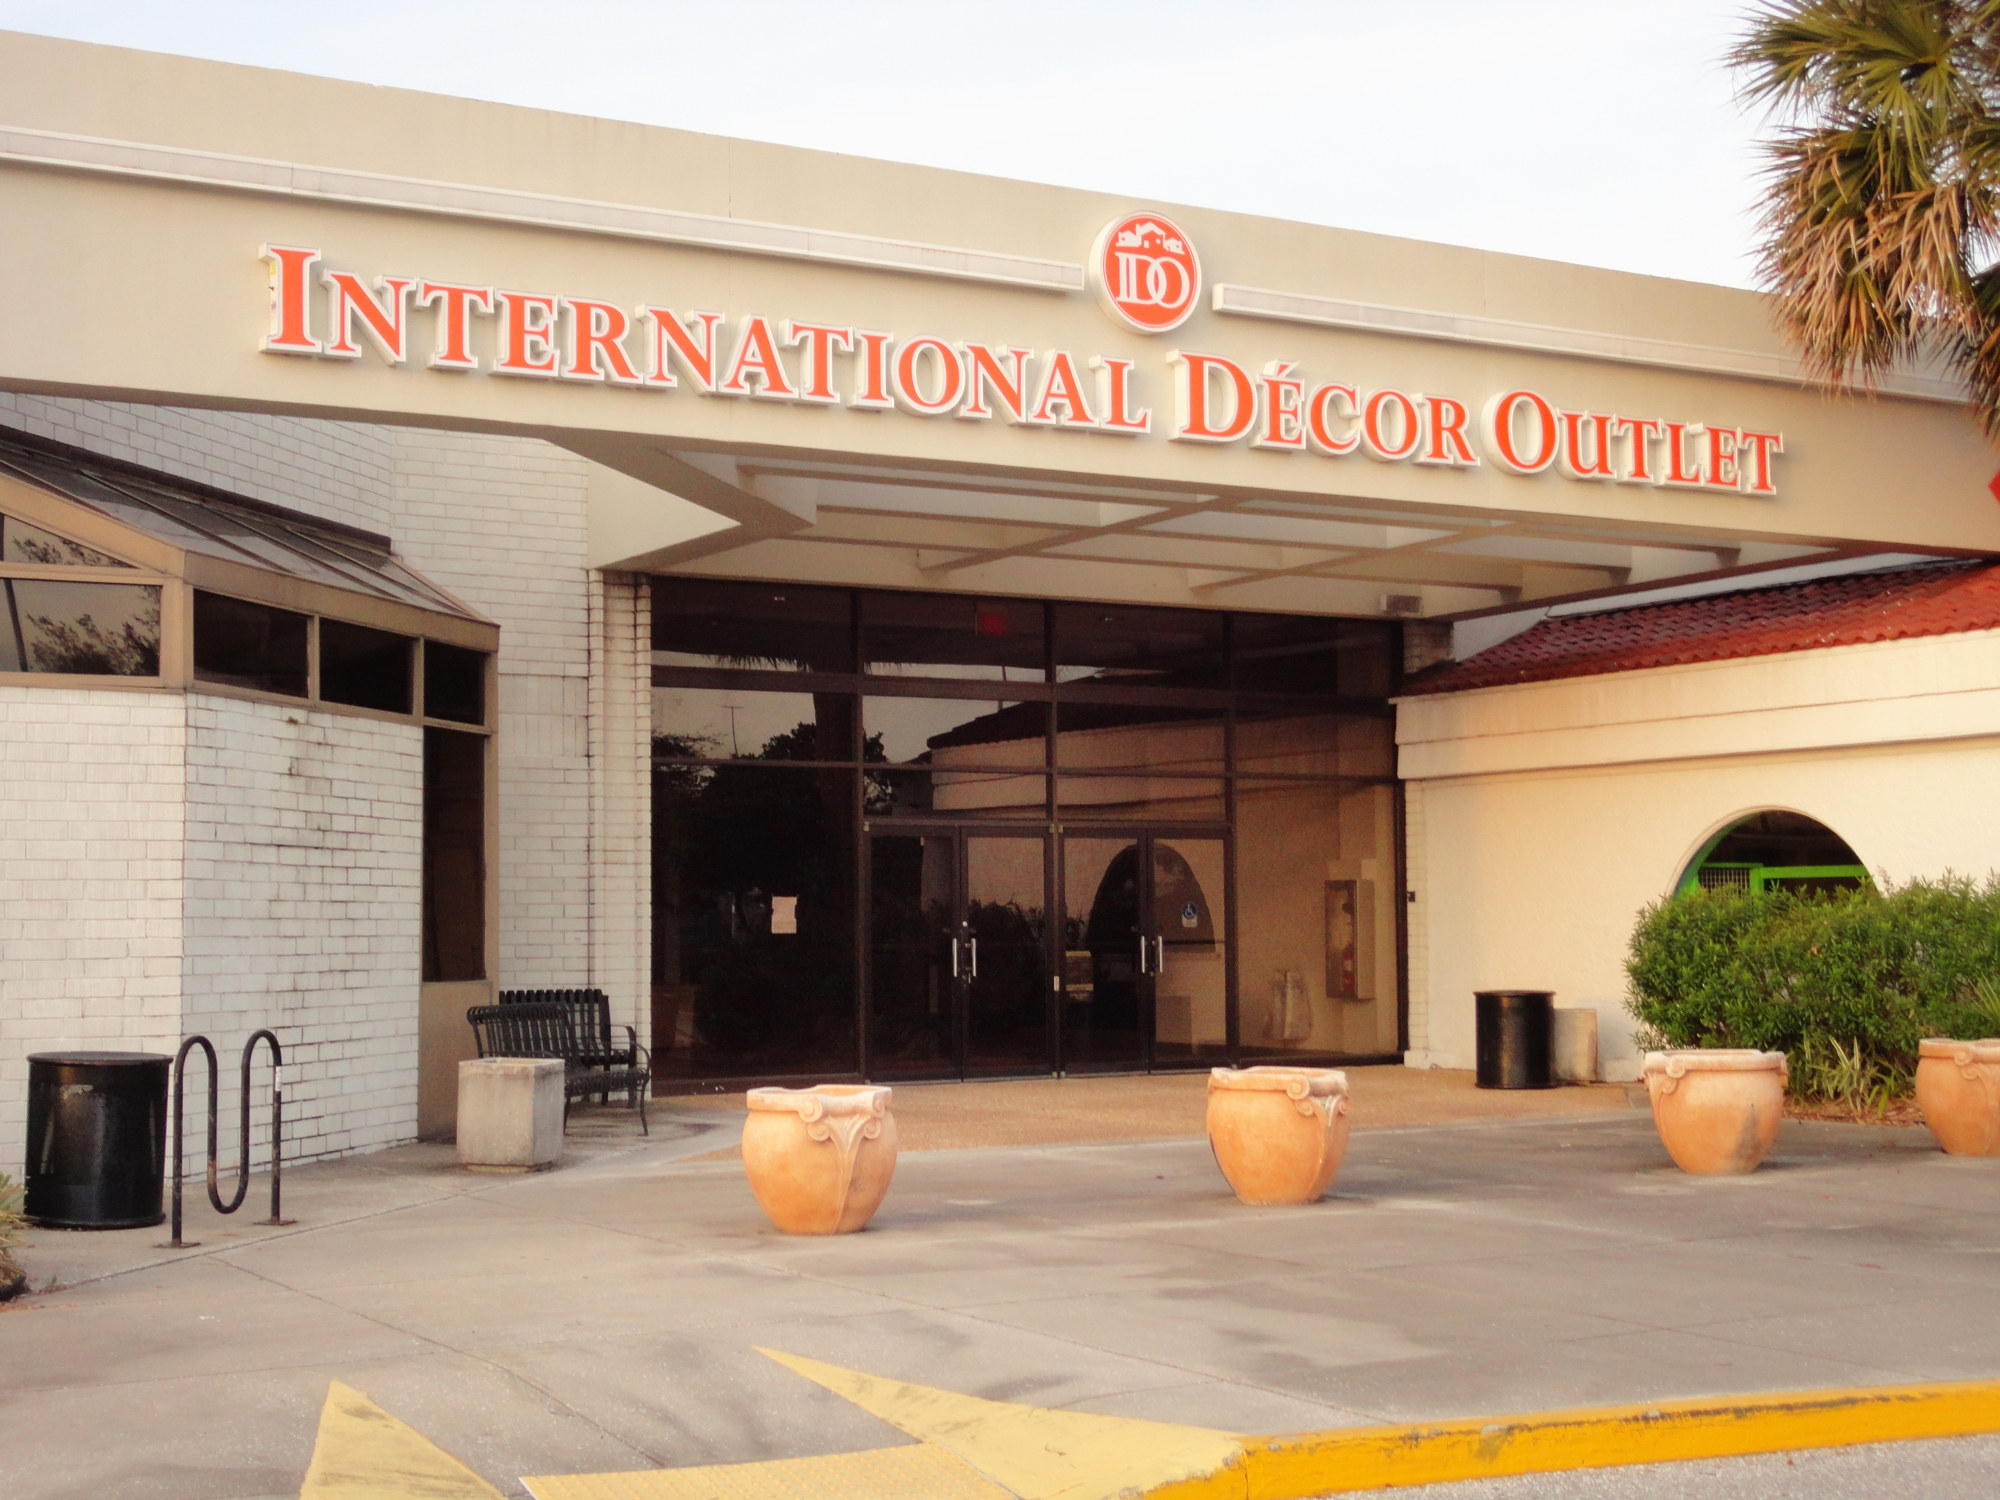 International Decor Outlet LLC filed a complaint in July 2017 against the mall ownership in a lease dispute over nearly 200,000 square feet in the west wing of the mall. That part of the mall is closed.